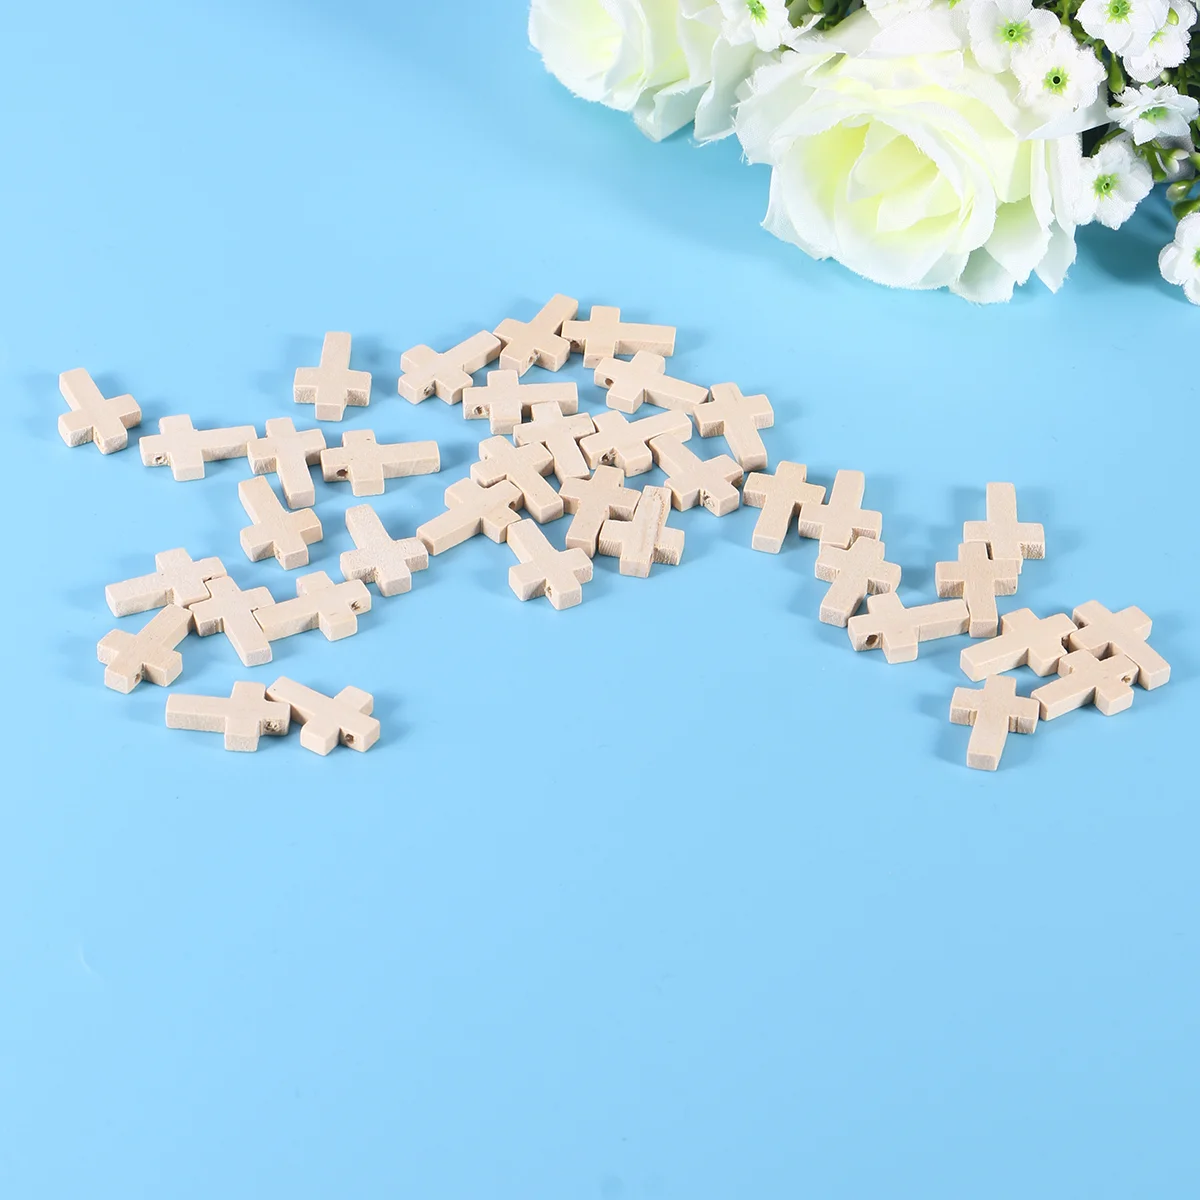 

100 Pcs Necklace Pendants Charm Wooden Jewelry Cross DIY Accessories Dyed Polished Sea shells